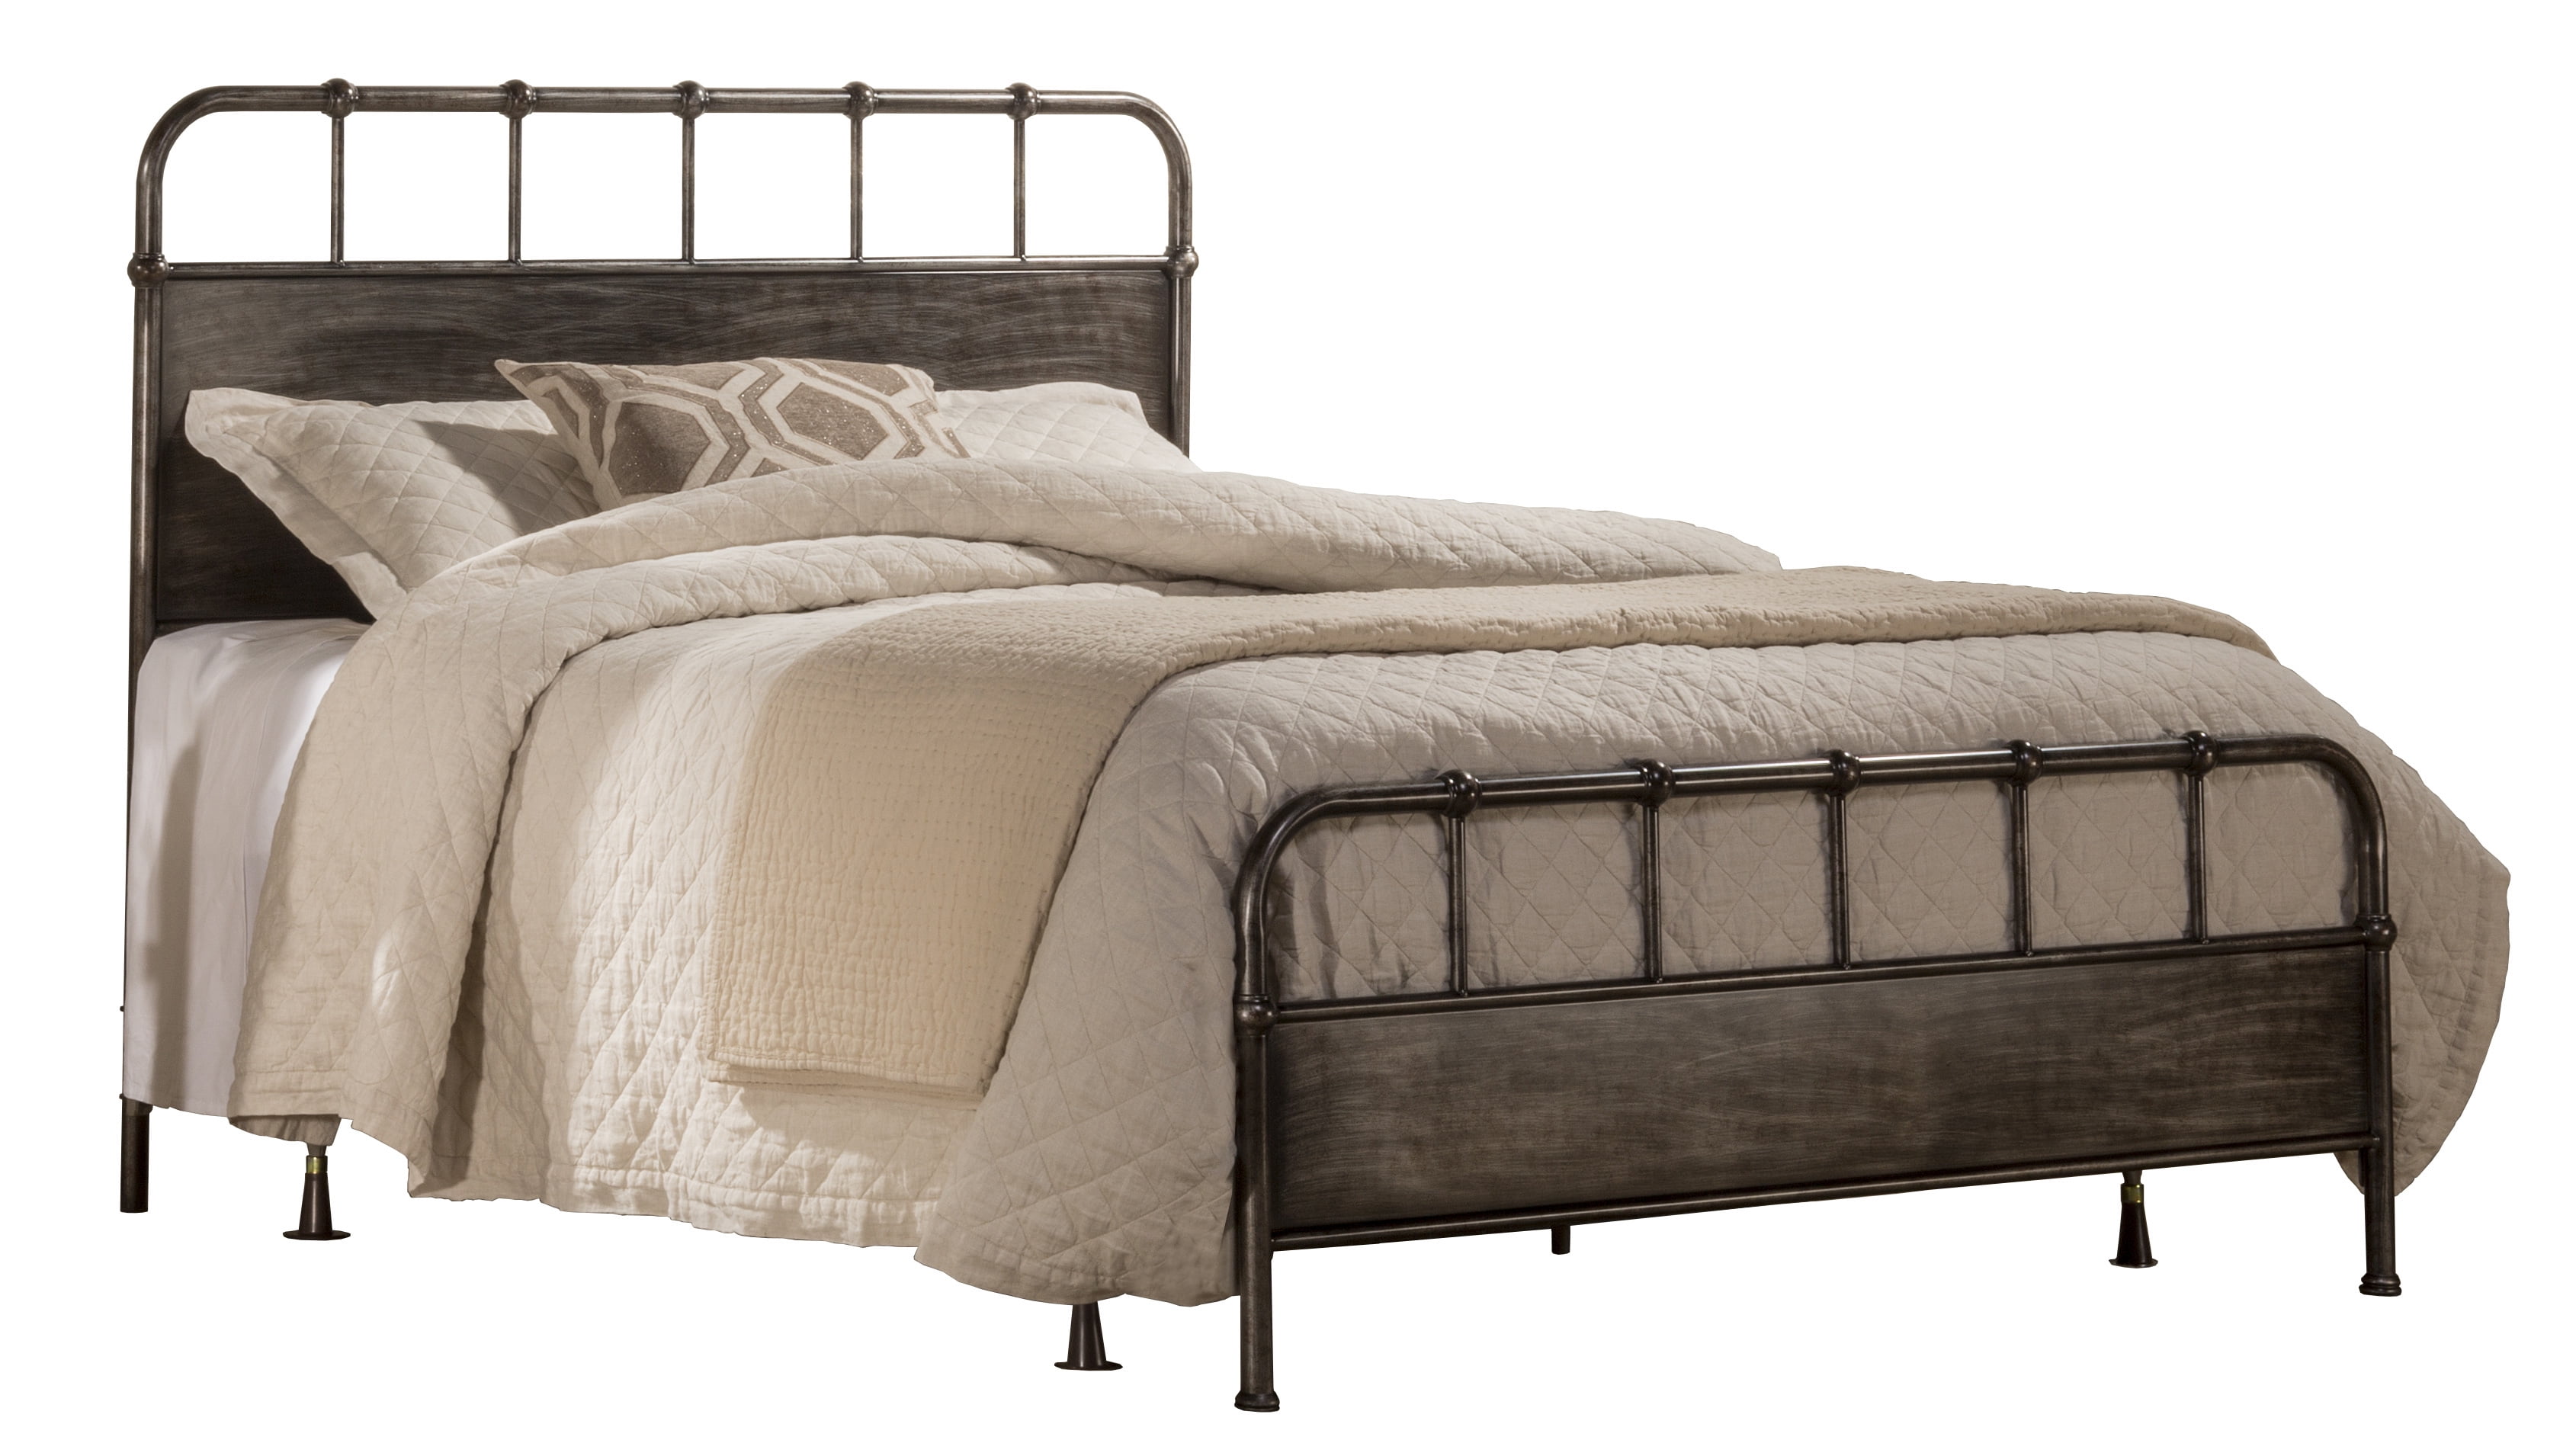 Hilale Furniture Grayson Rustic, Rustic Industrial King Size Bed Frame